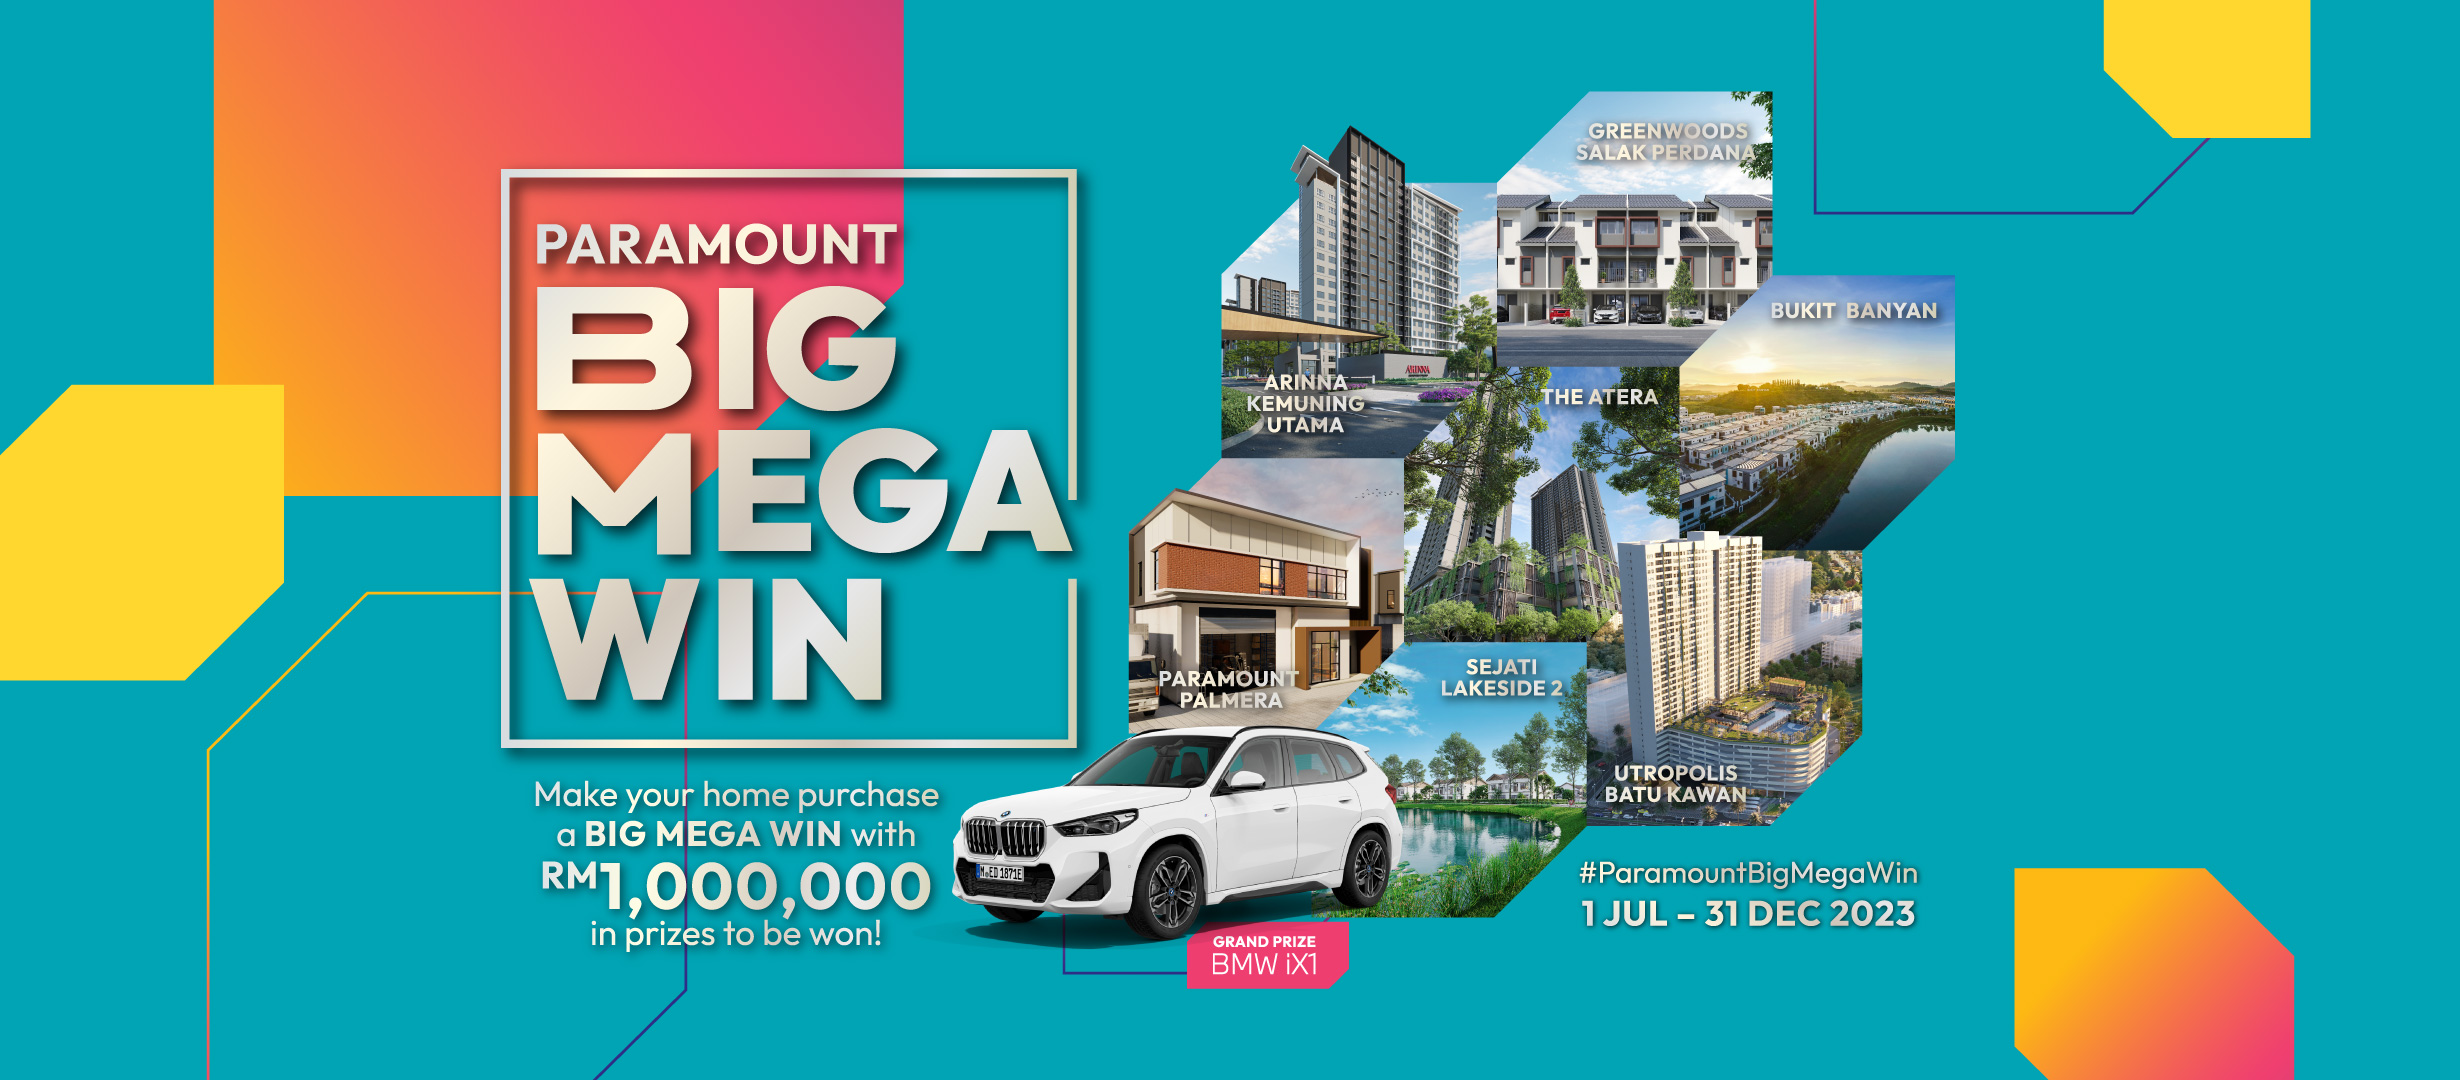 Bmw ix could be yours after purchasing your dream home with paramount property, here's how